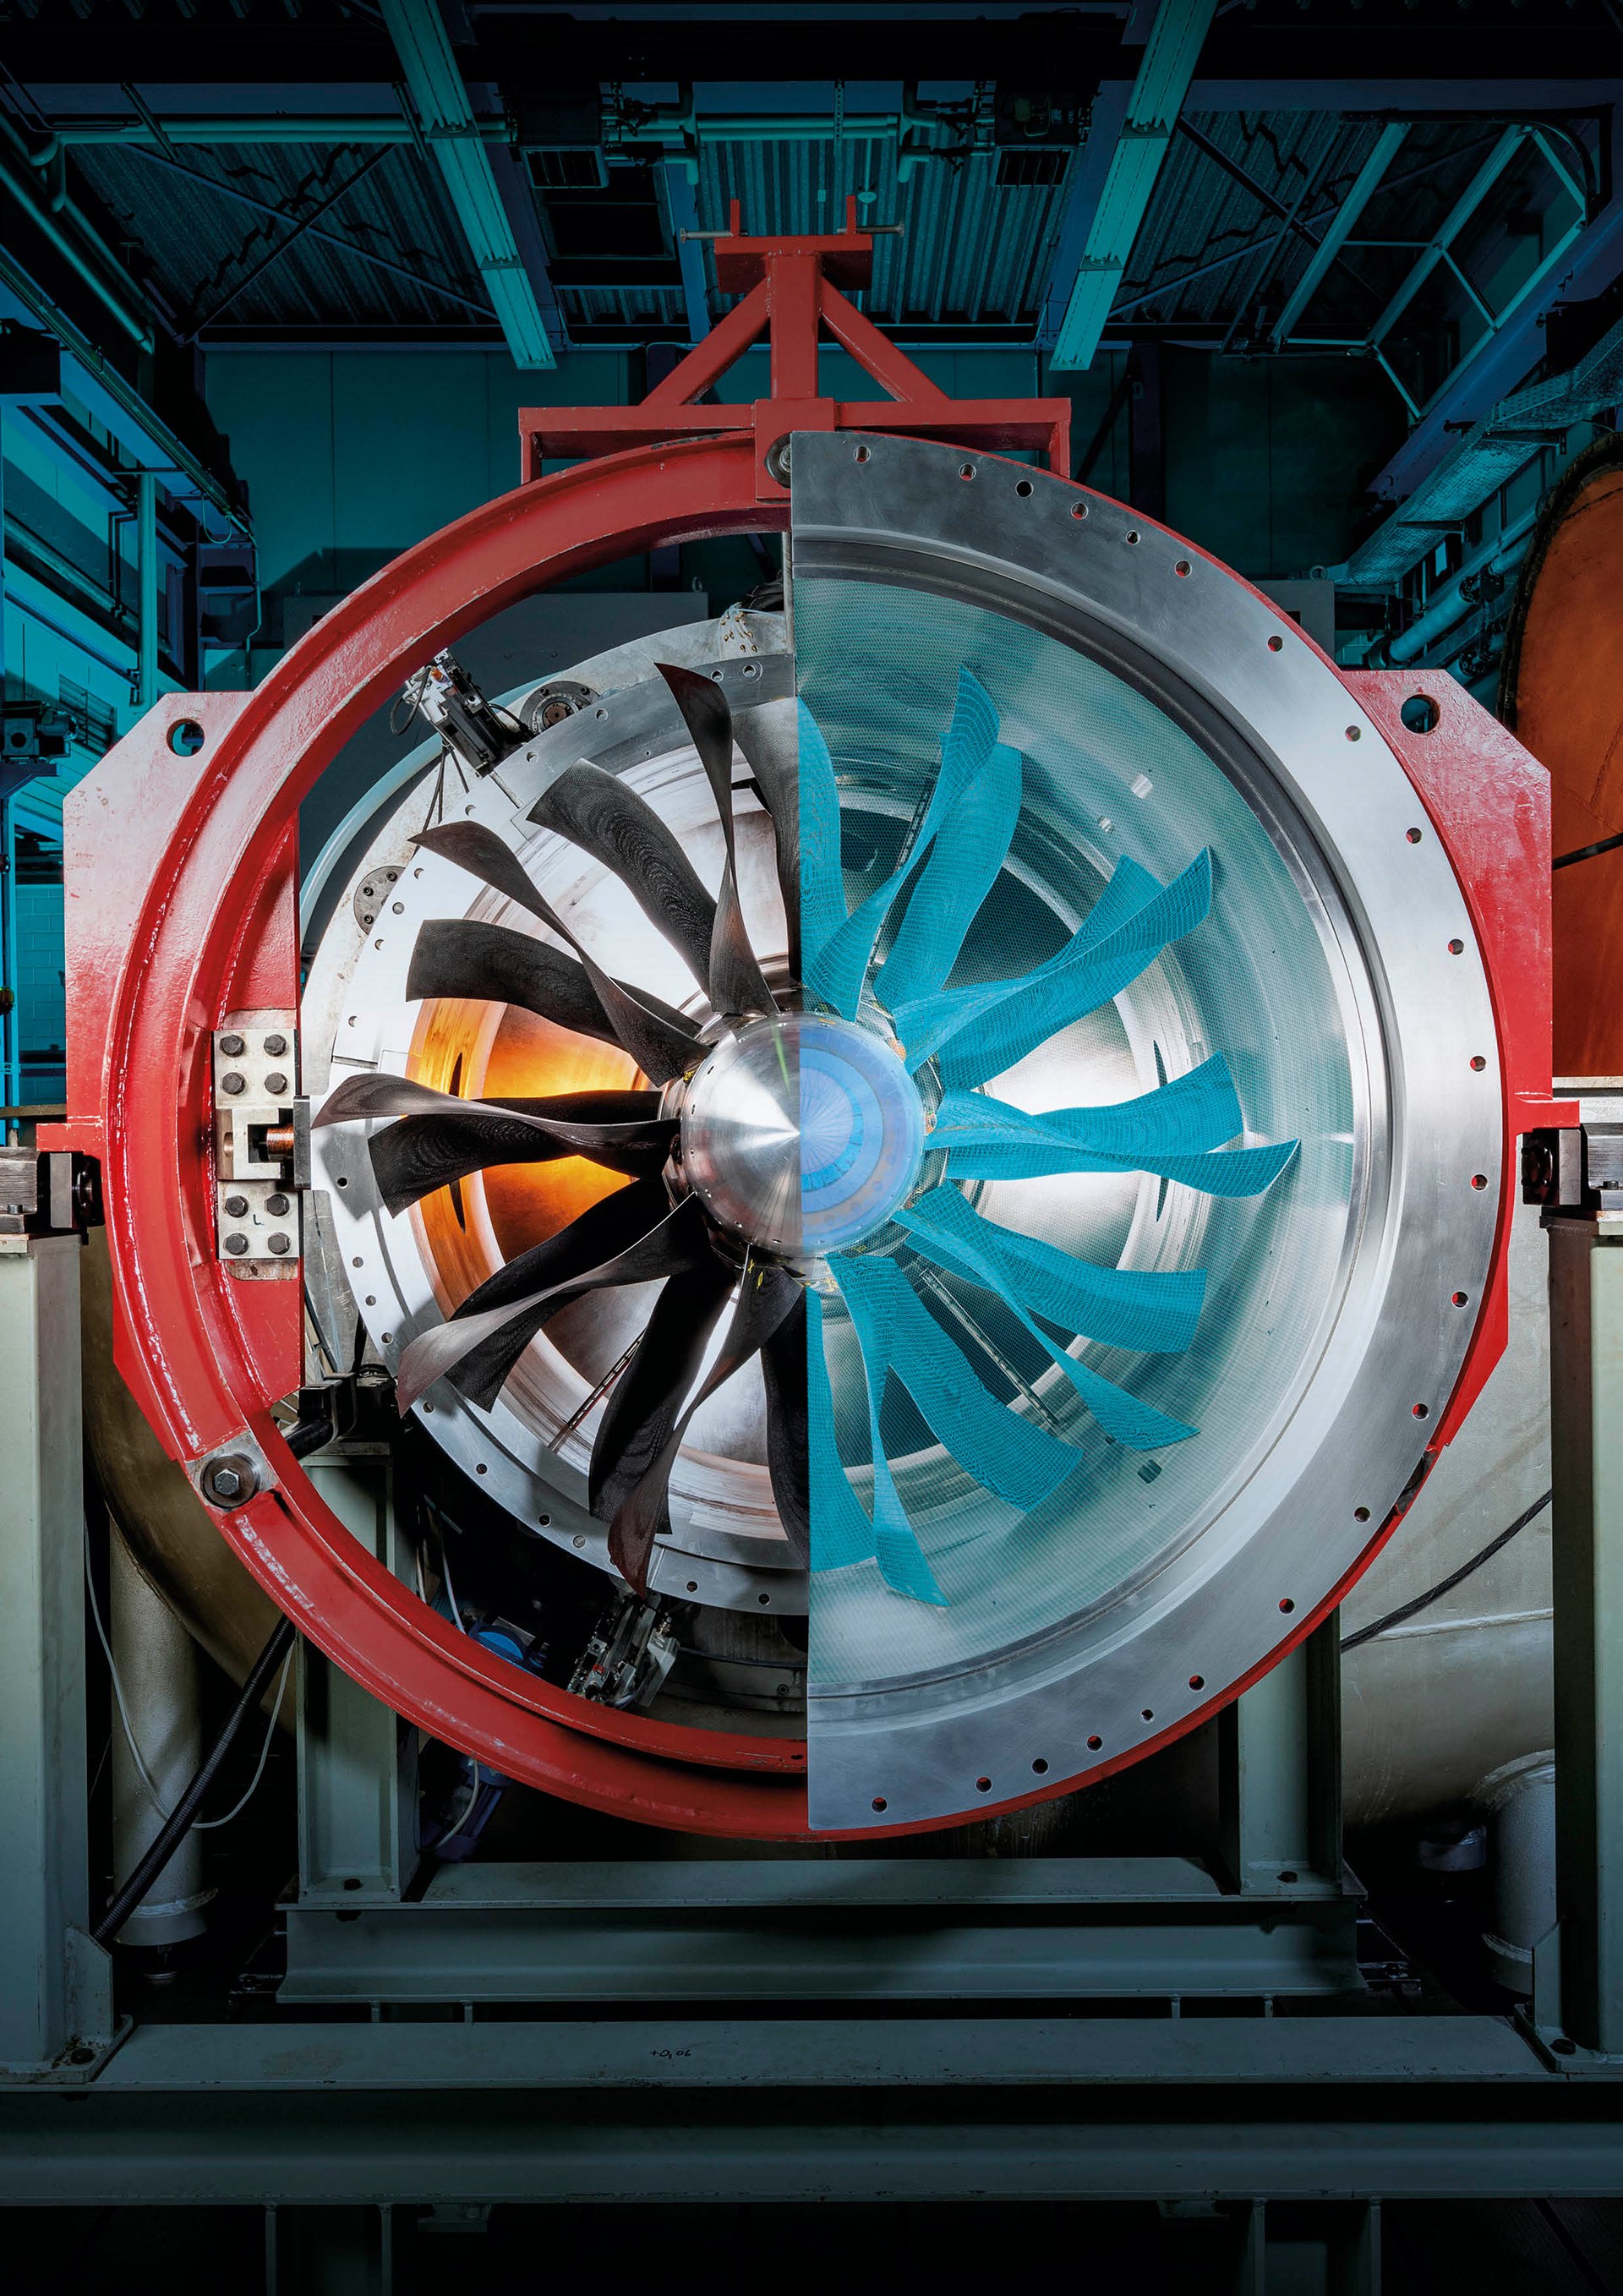 At DLR engines are investigated in various ways